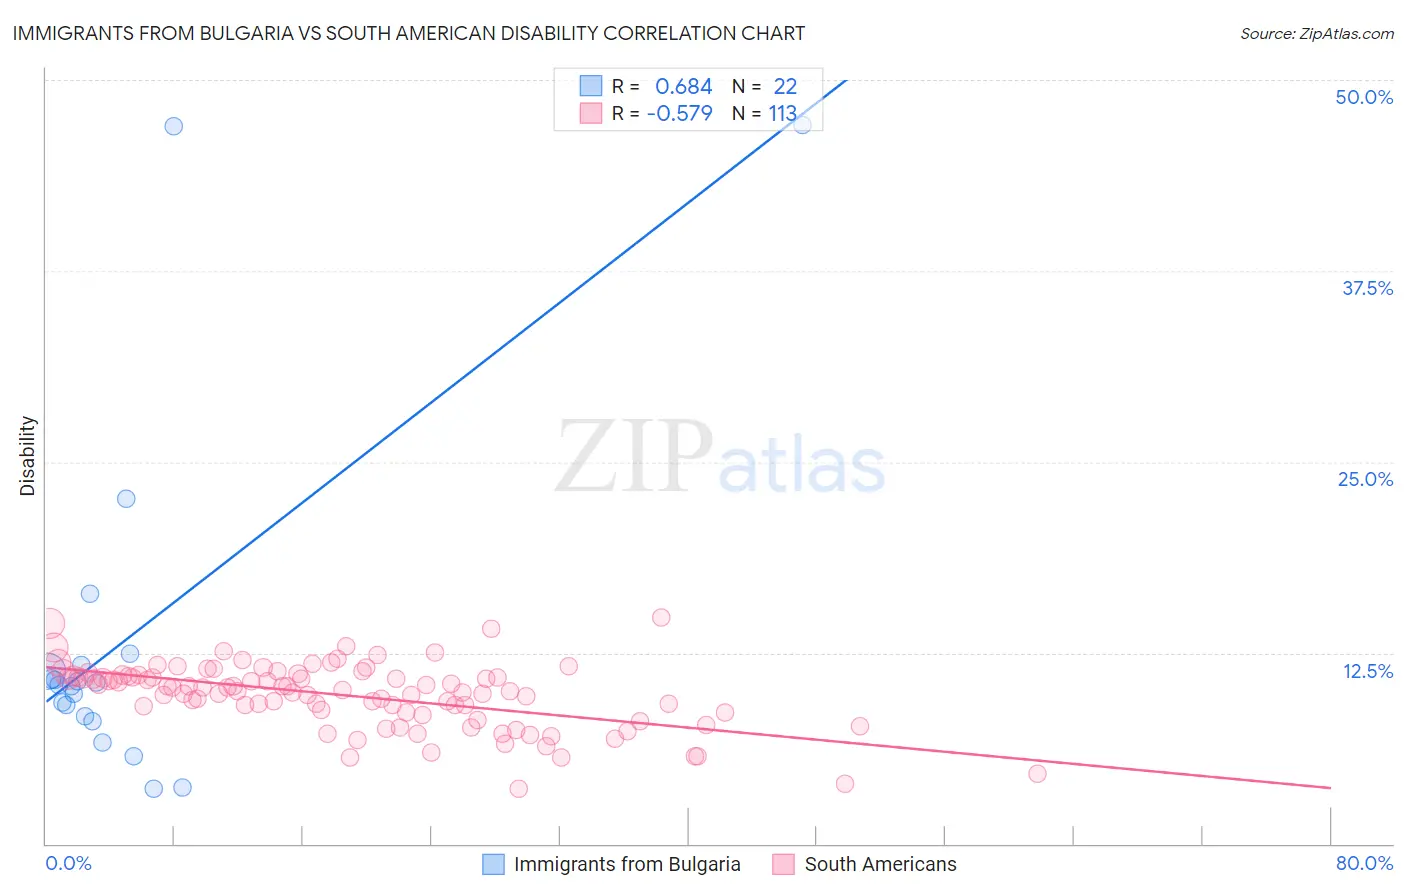 Immigrants from Bulgaria vs South American Disability